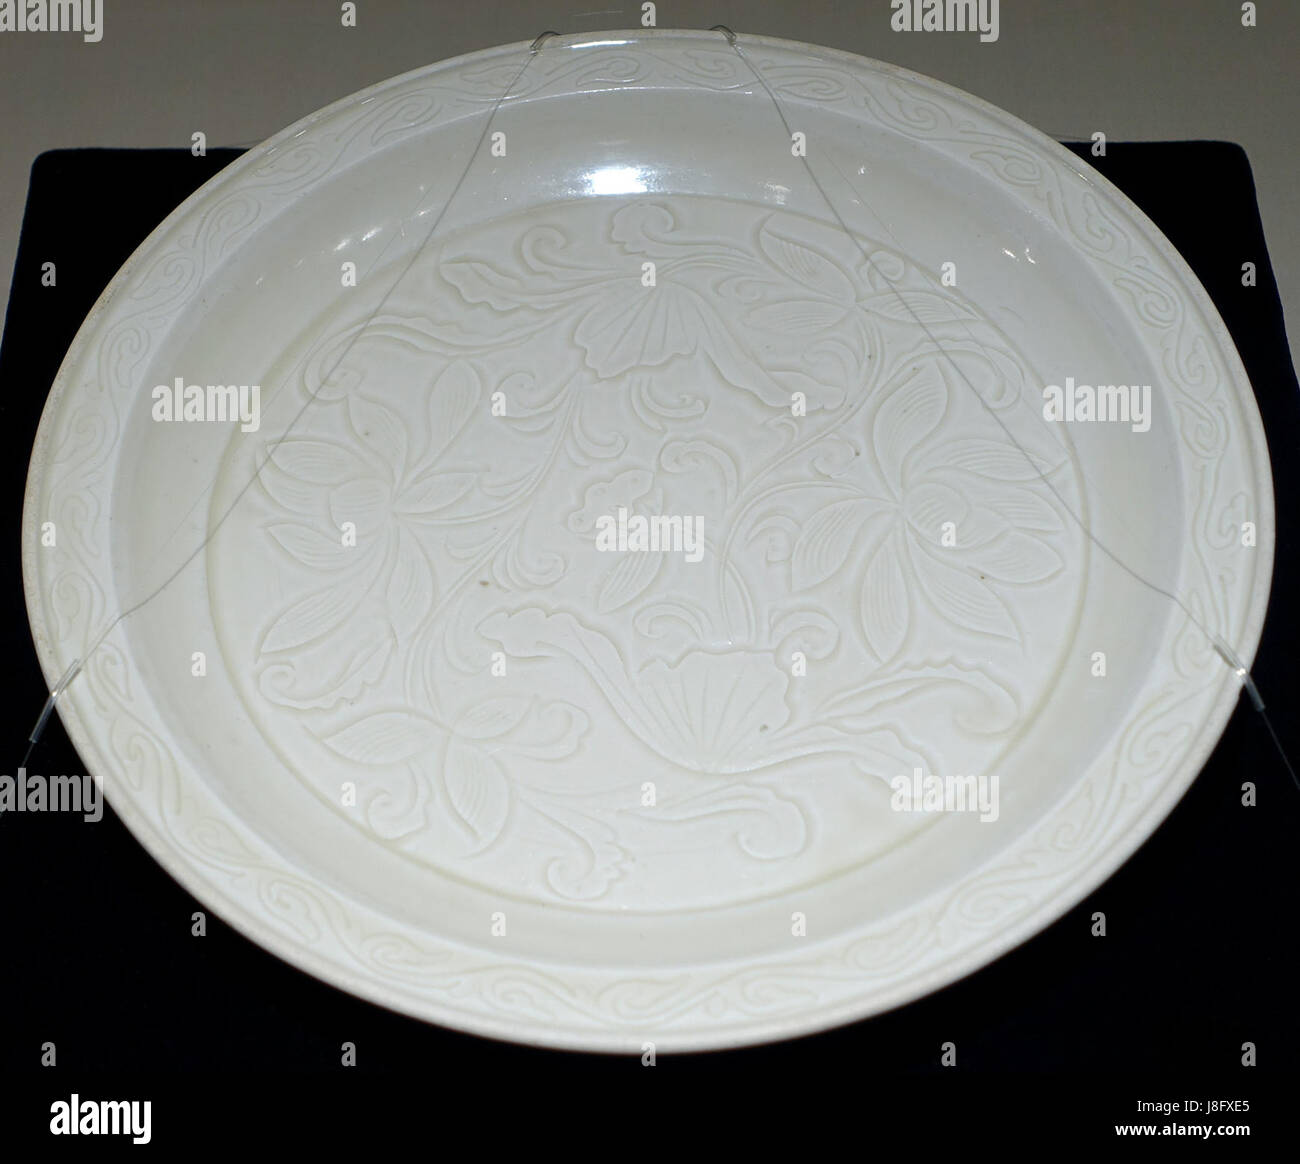 Dish with incised lotus design, China, Ding kiln, Northern Song dynasty, 11th 12th century AD, white porcelain   Matsuoka Museum of Art   Tokyo, Japan   DSC07312 Stock Photo